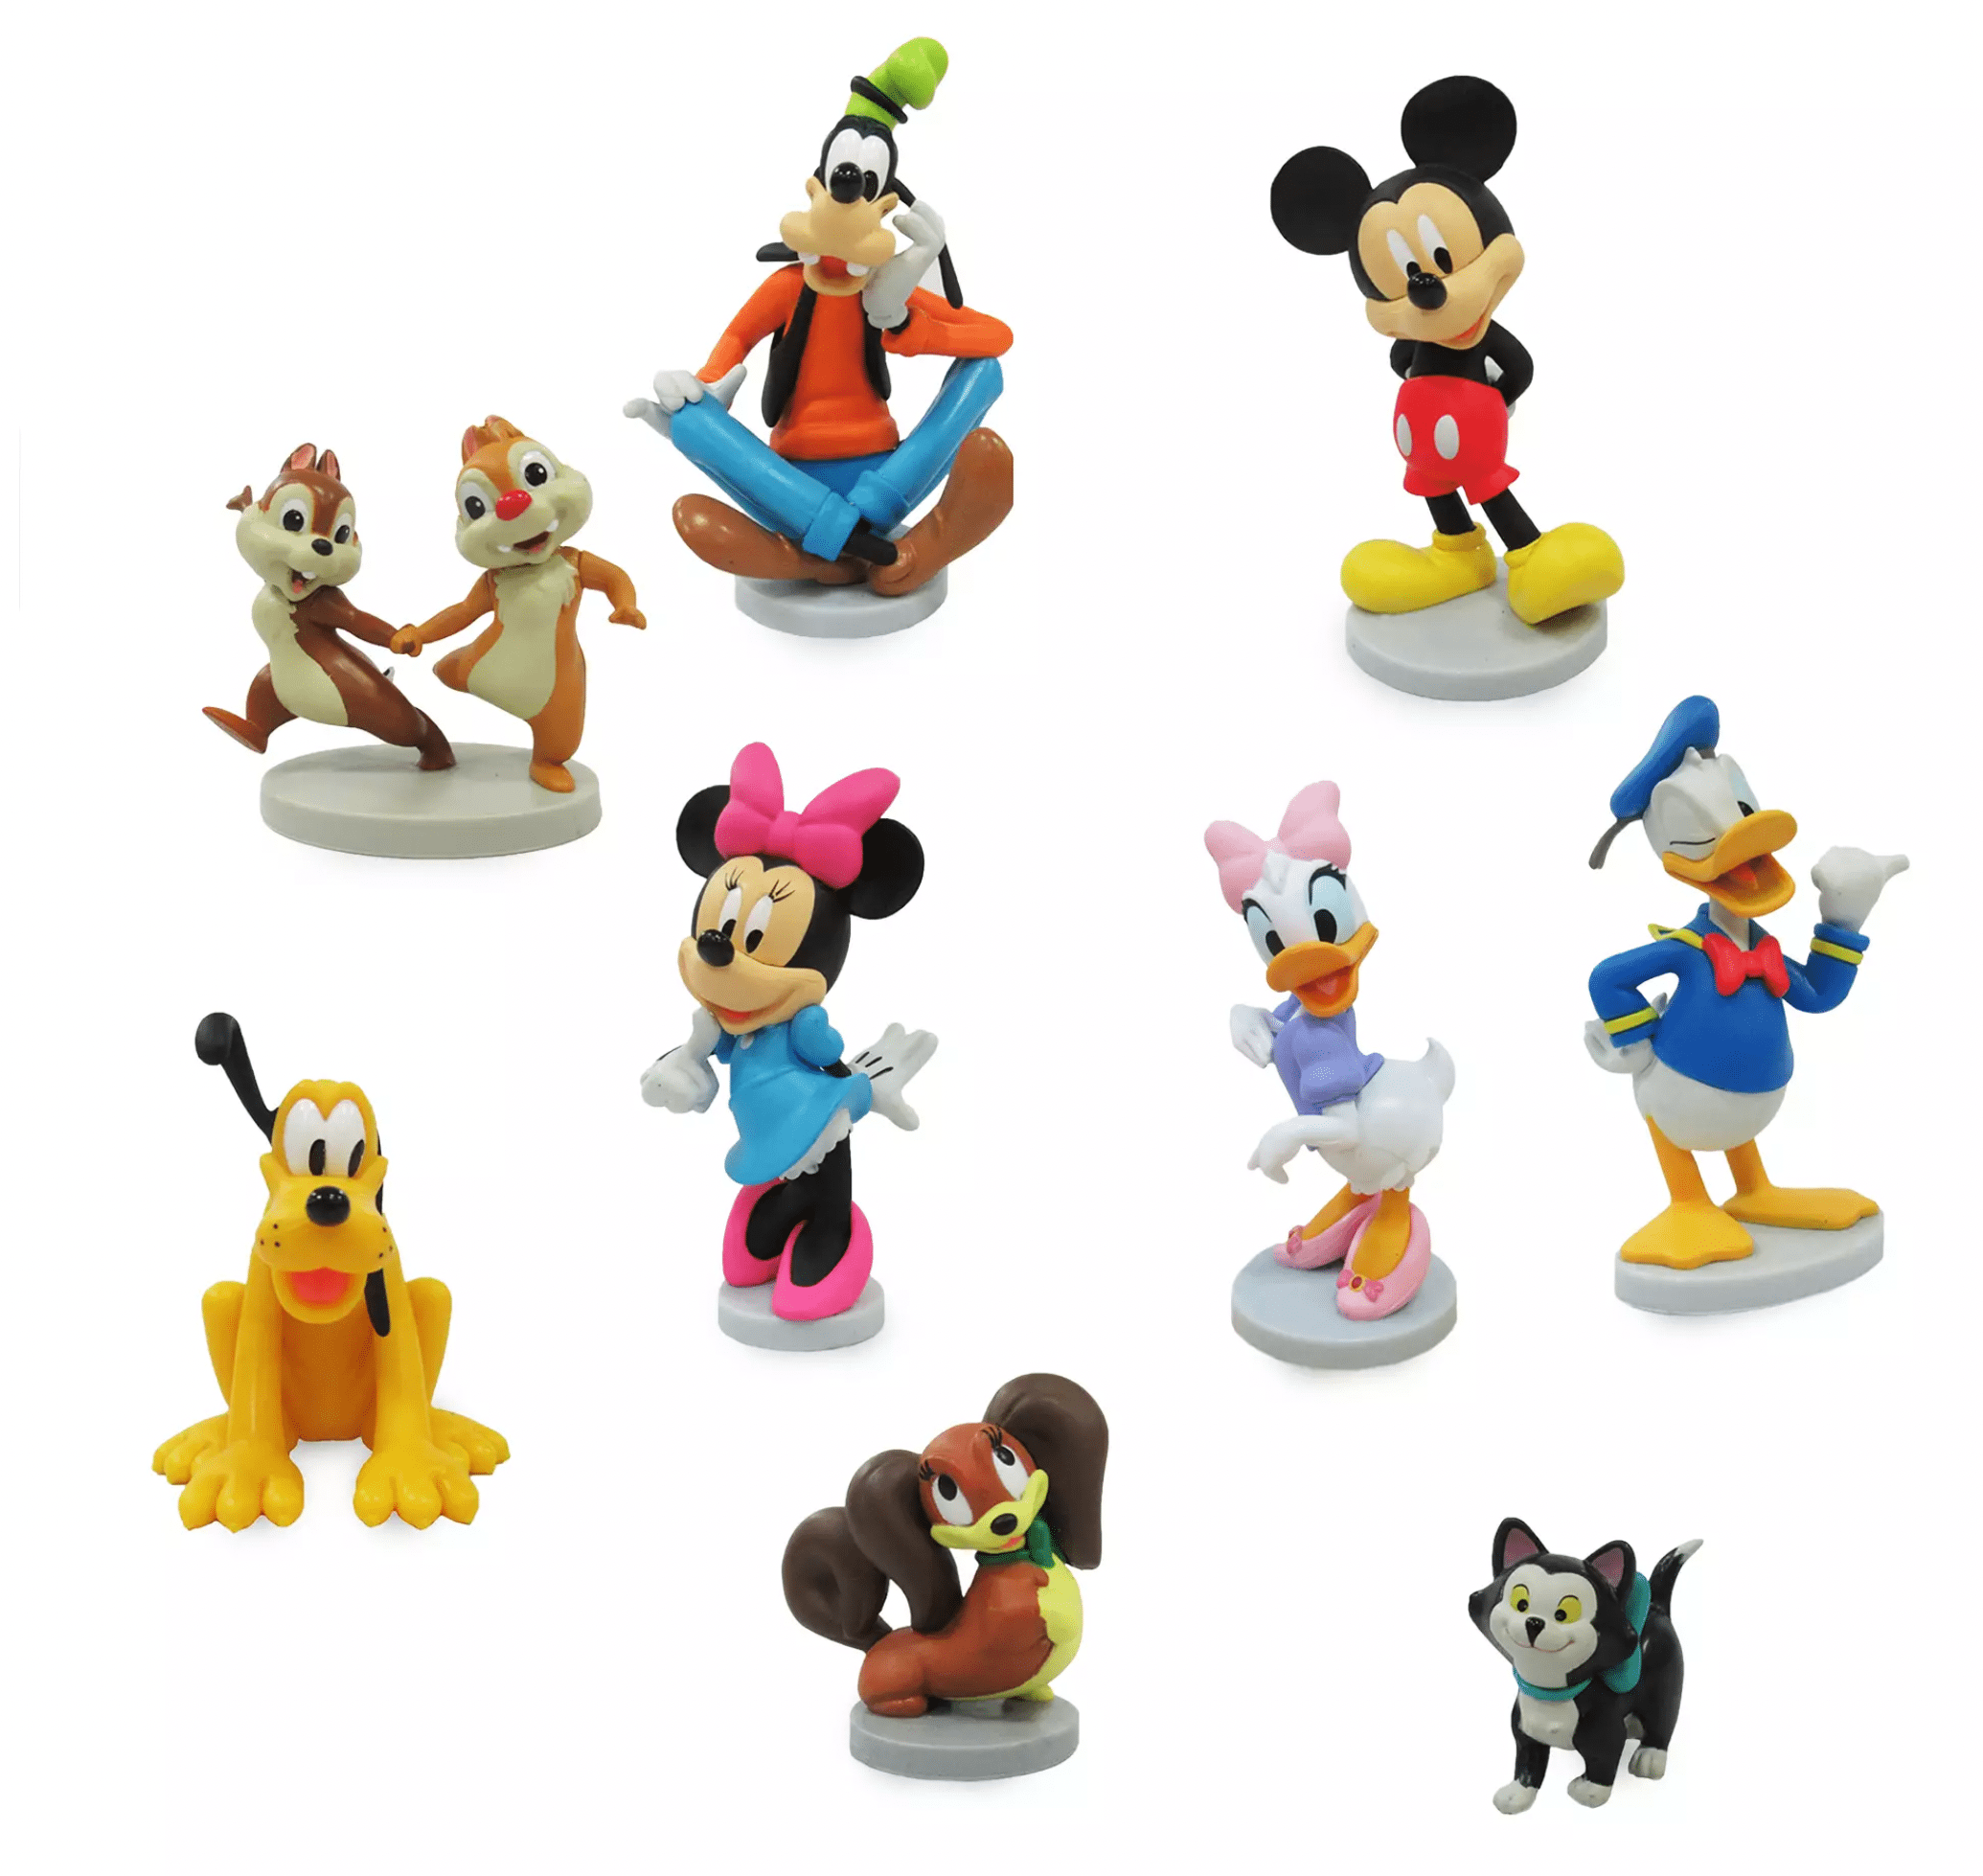 Disney Mickey Mouse Clubhouse Deluxe Party Favor Set of 14 